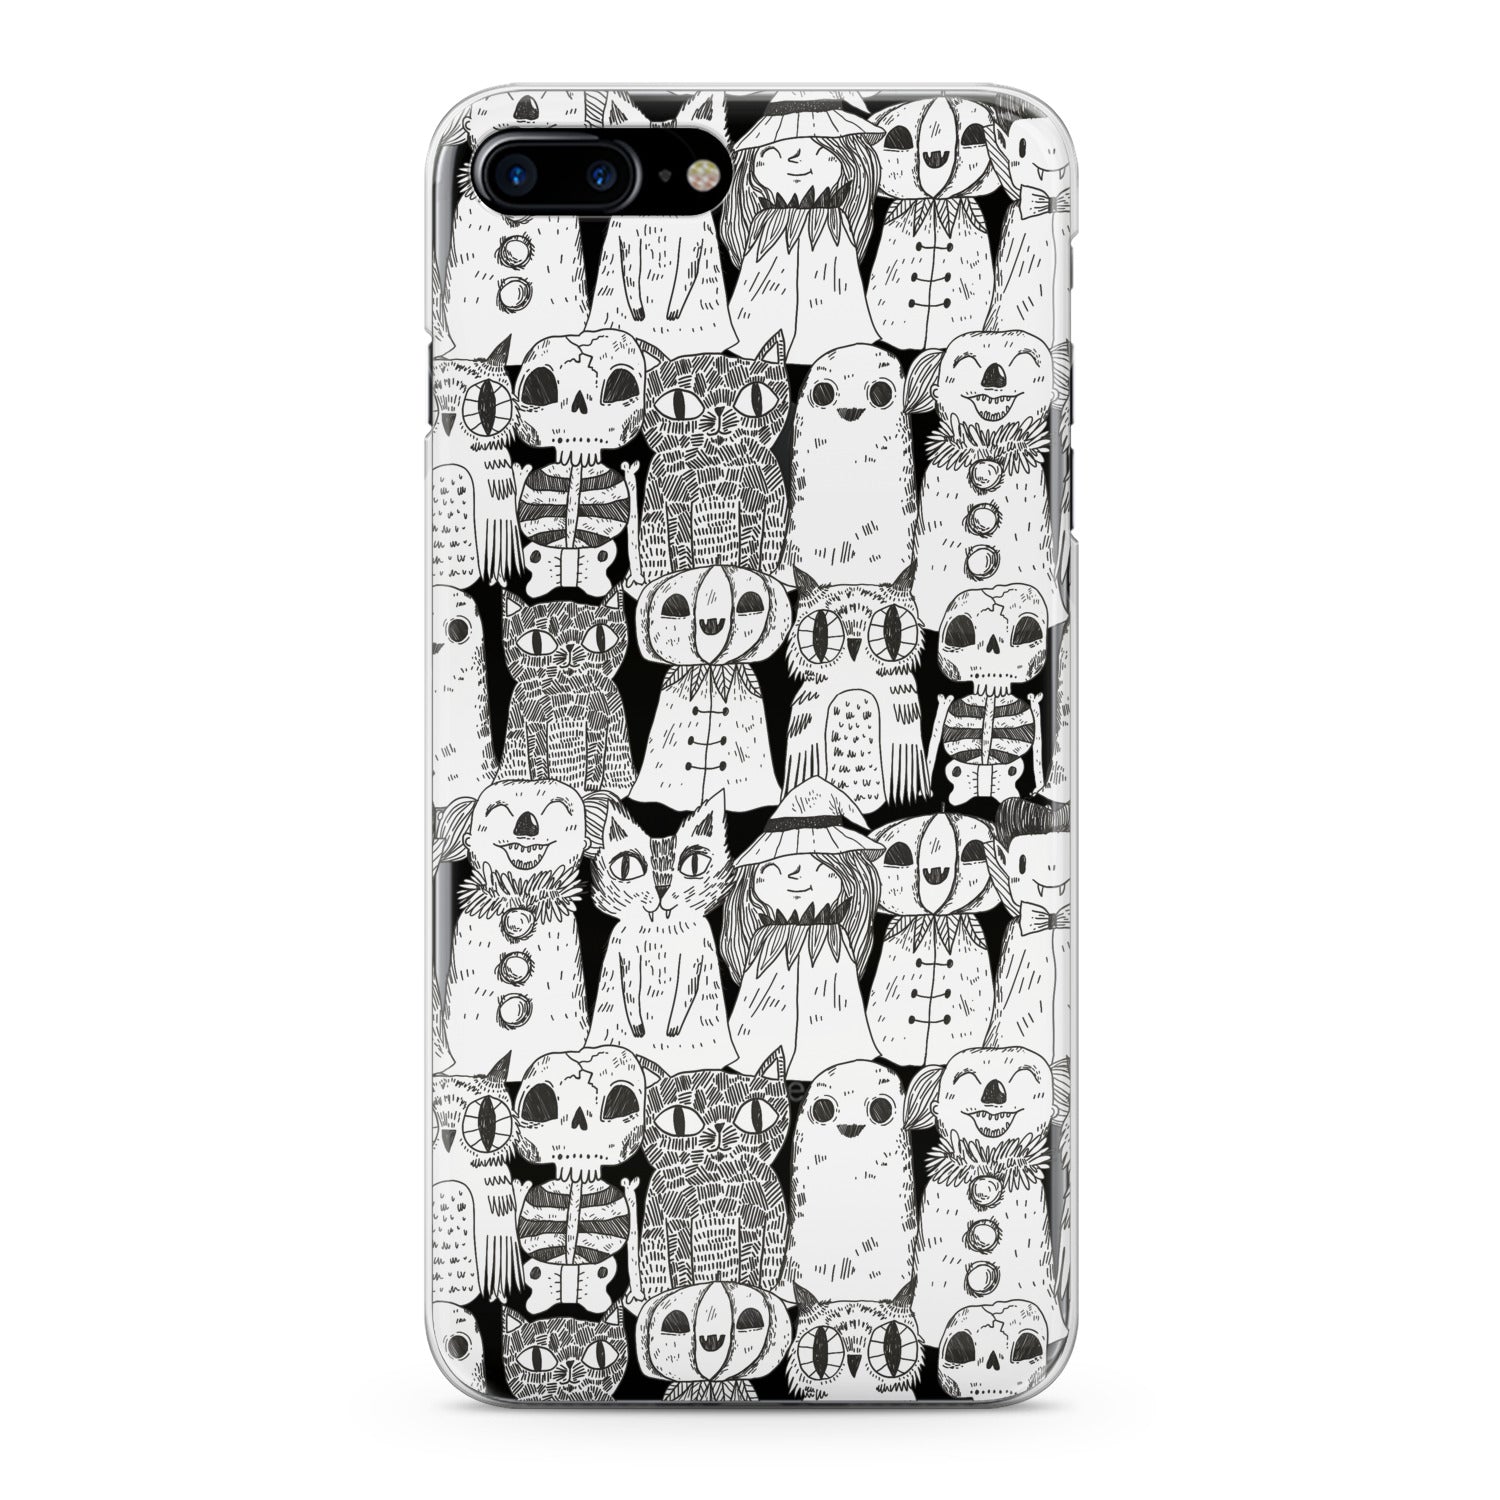 Lex Altern Pencil Drawing Cats Phone Case for your iPhone & Android phone.